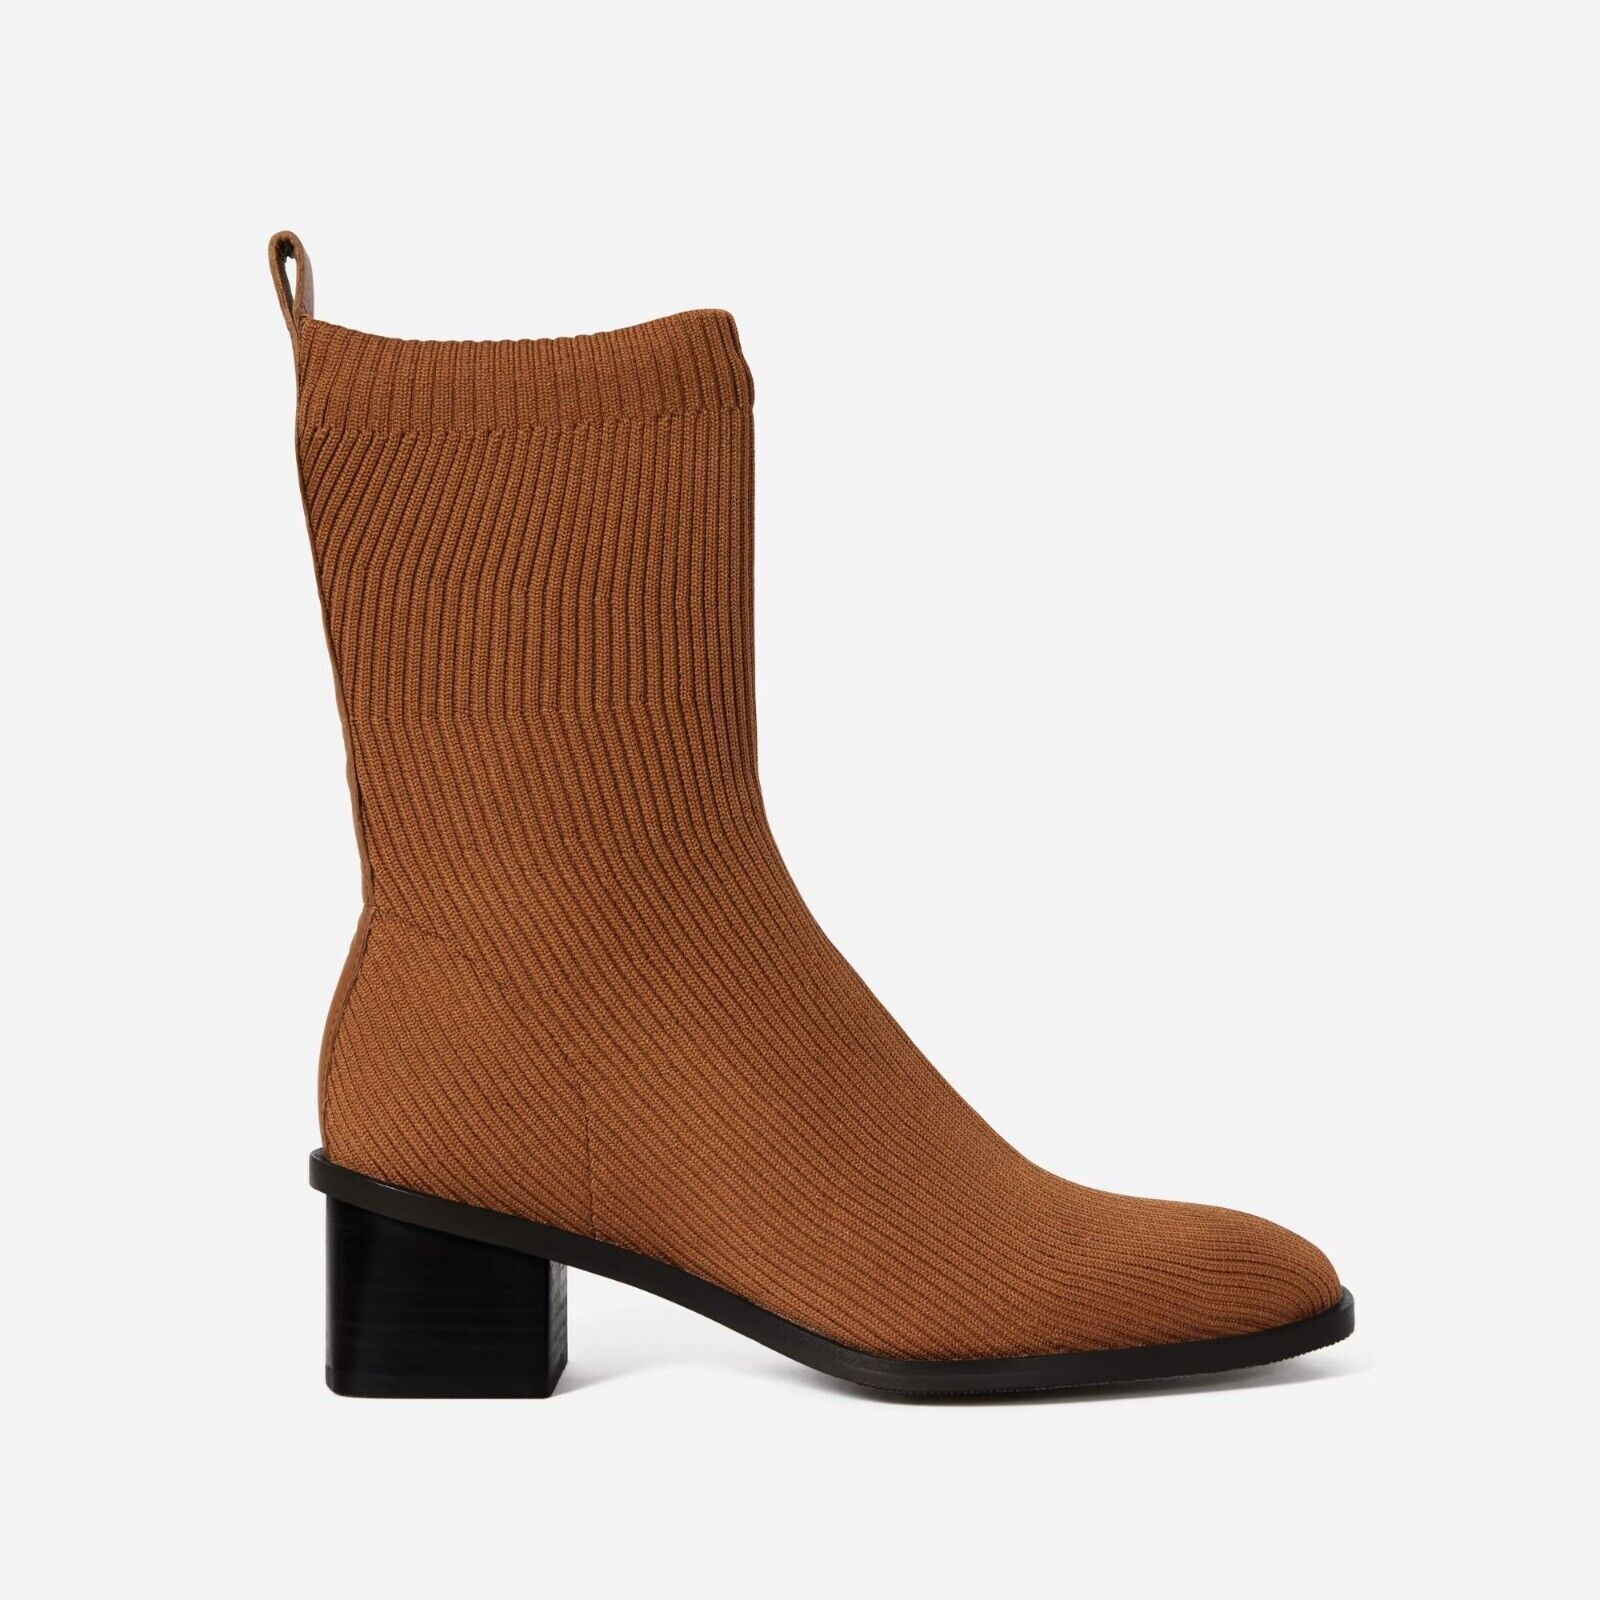 Primary image for Everlane Shoes The High-Ankle Glove Boot in ReKnit Toffee Brown Size 7